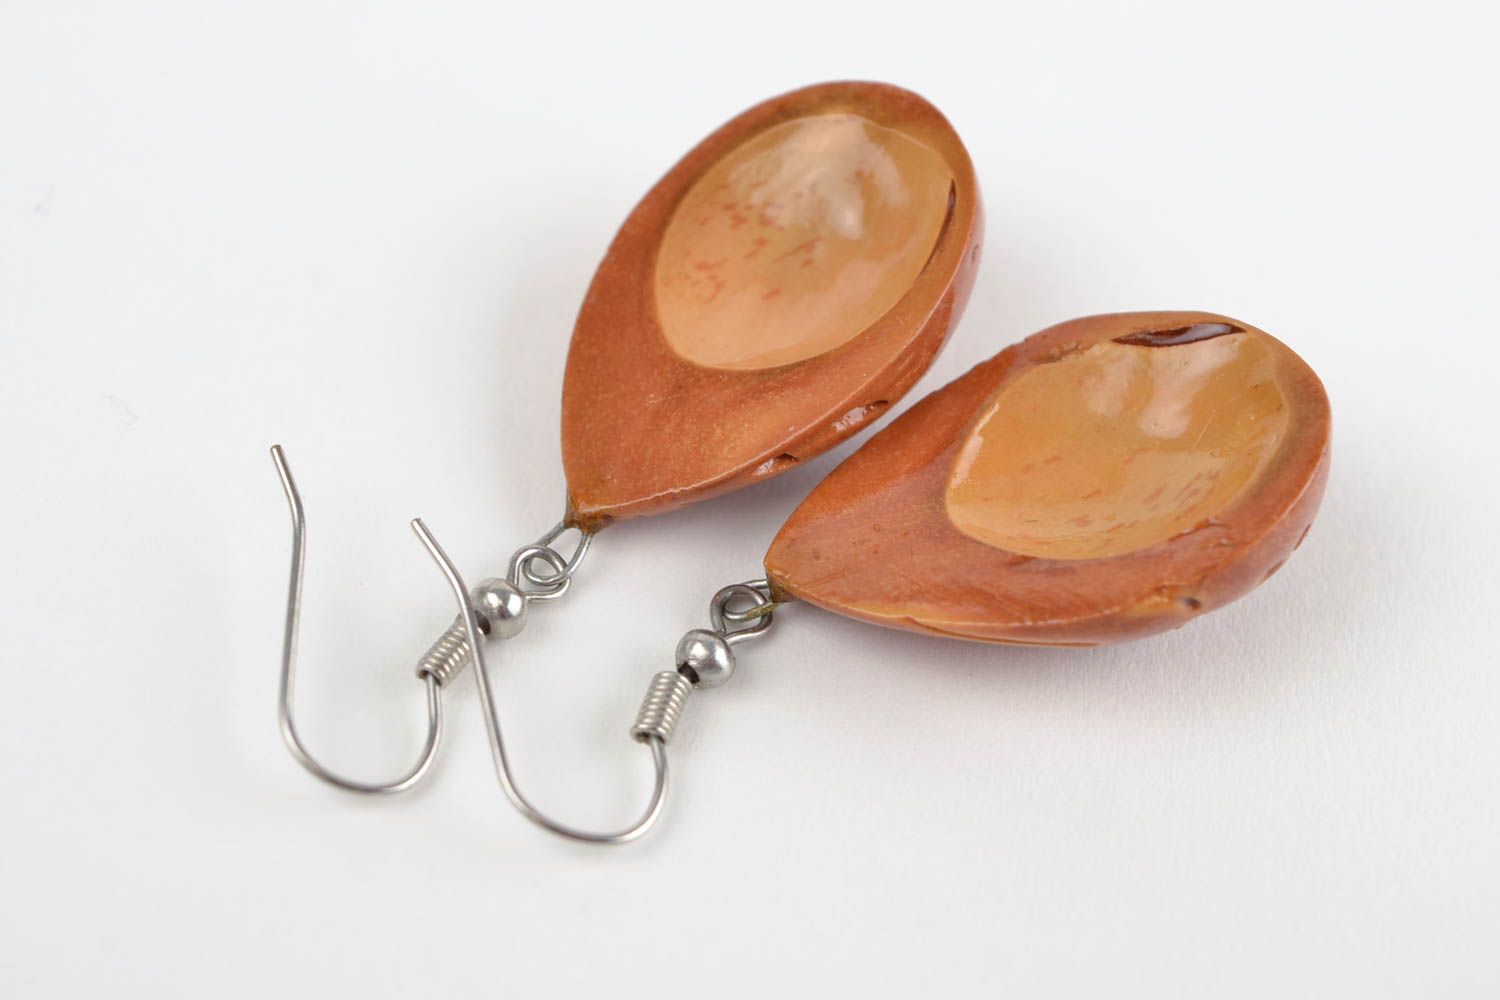 Homemade jewelry designer earrings wooden earrings fashion accessories photo 5